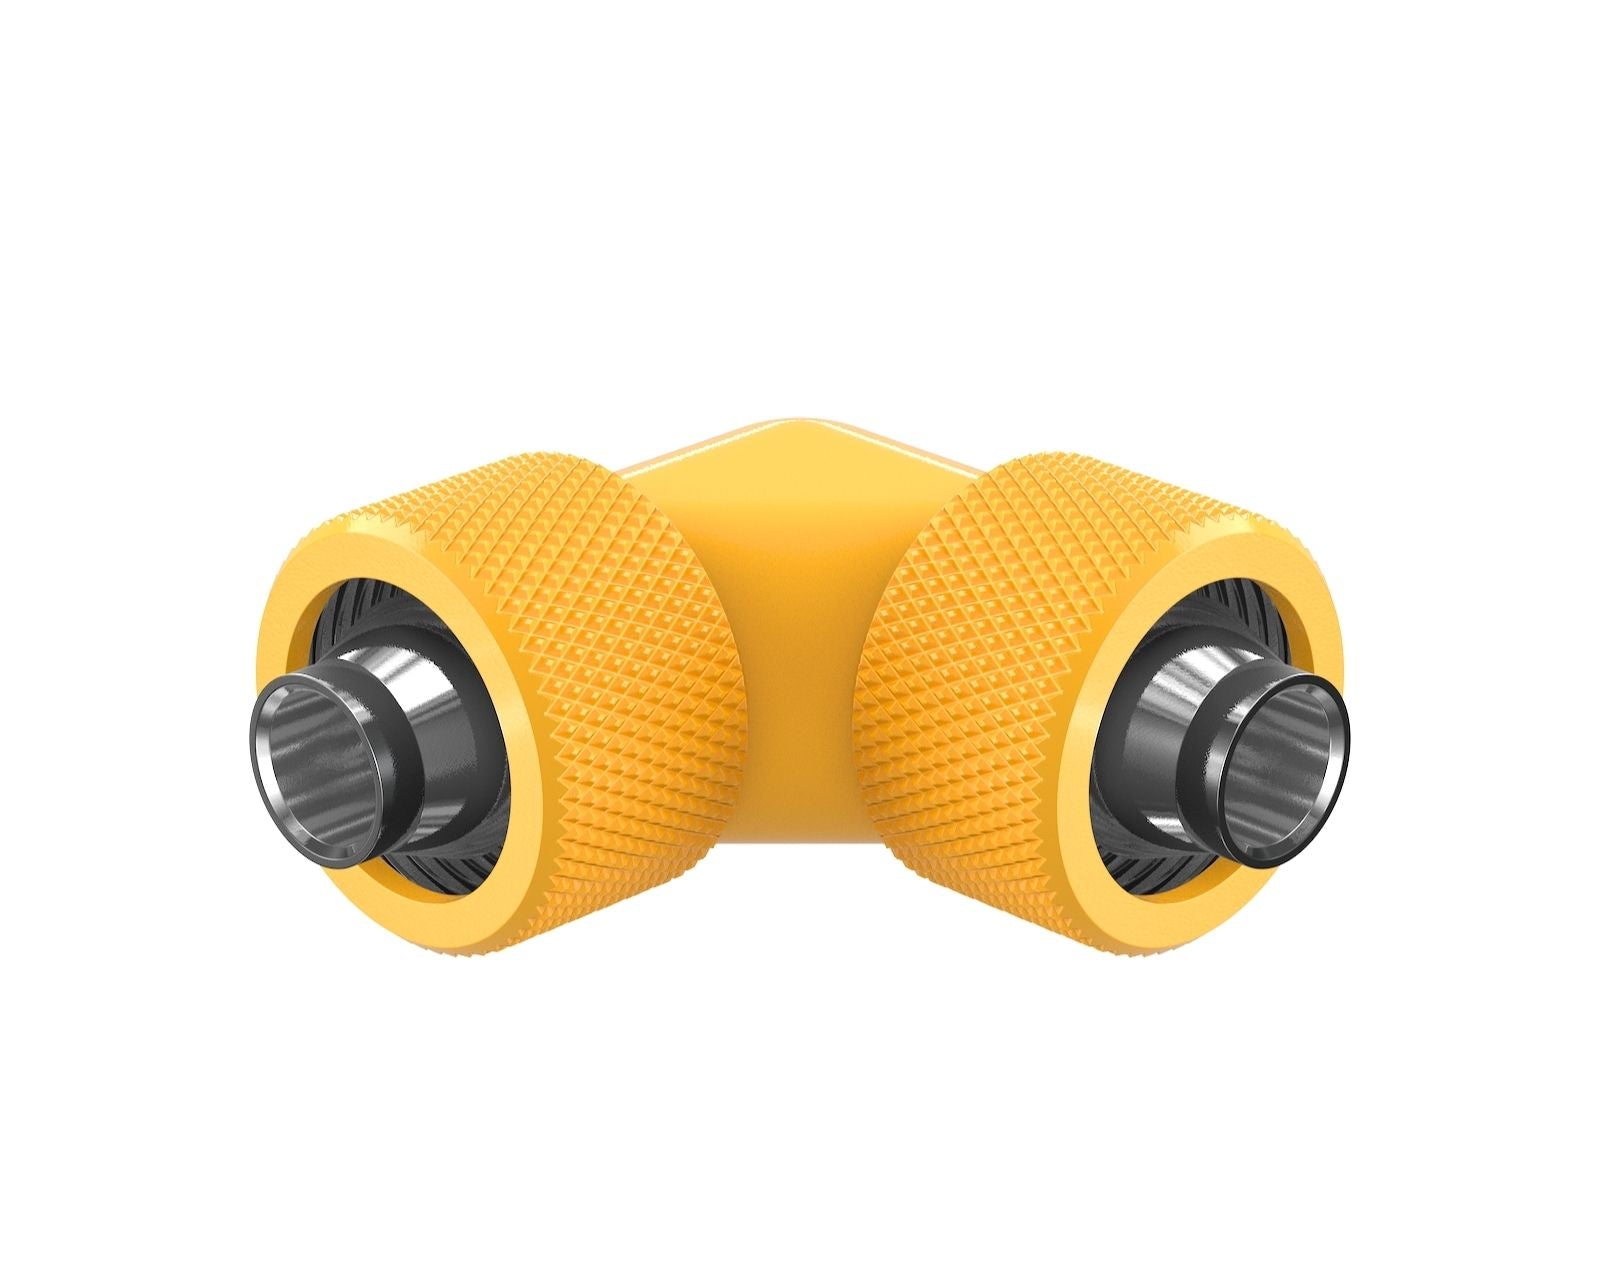 PrimoChill SecureFit SX - Premium 90 Degree Compression Fitting Set For 3/8in ID x 5/8in OD Flexible Tubing (F-SFSX5890) - Available in 20+ Colors, Custom Watercooling Loop Ready - Yellow